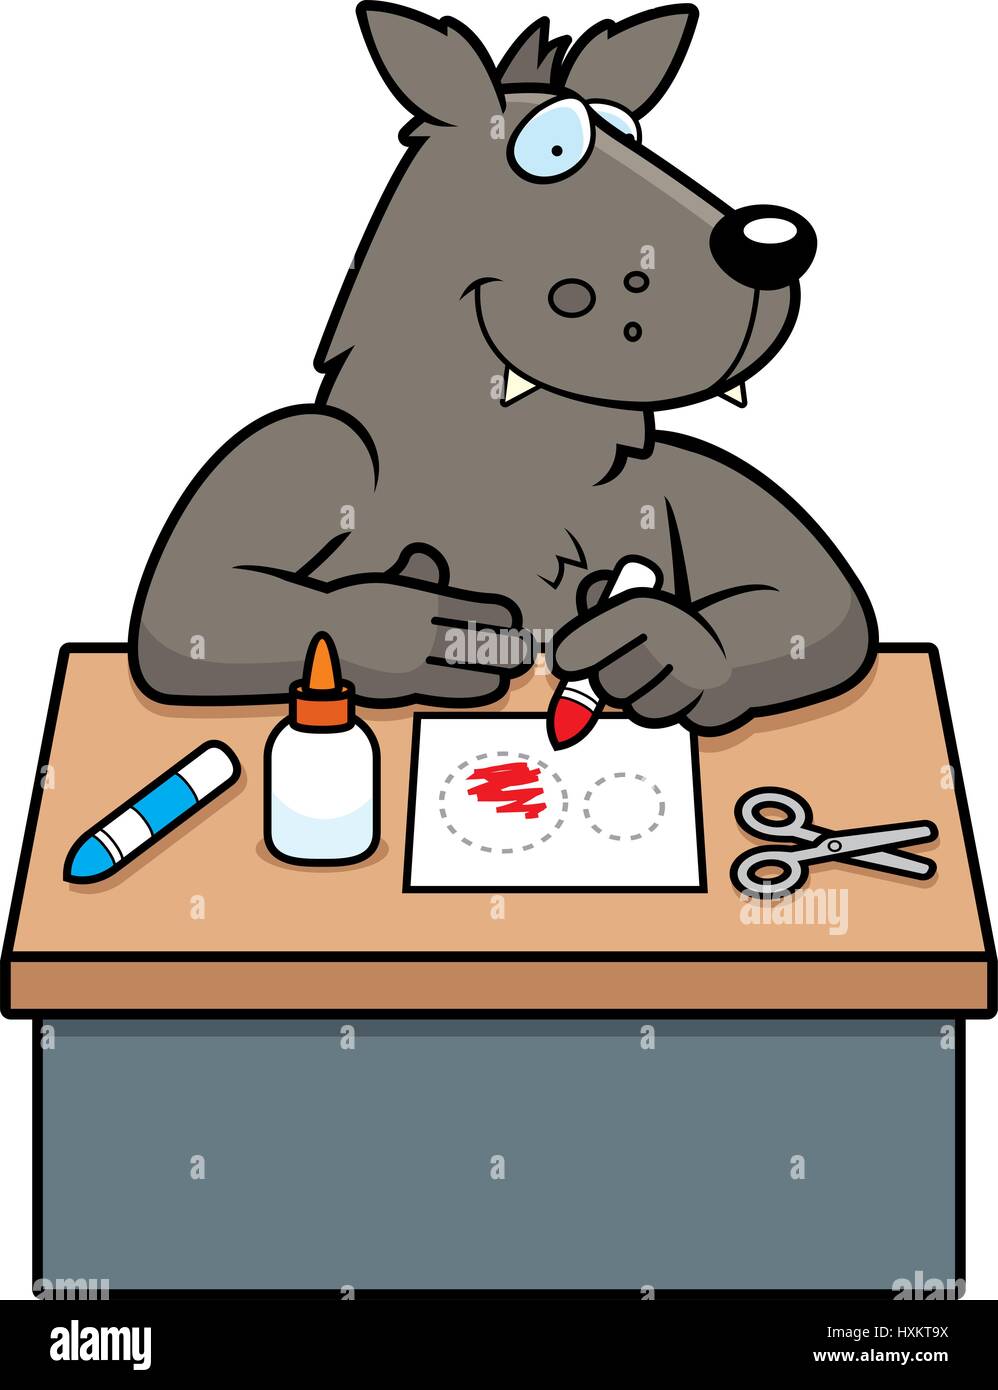 A cartoon illustration of a wolf doing arts and crafts. Stock Vector